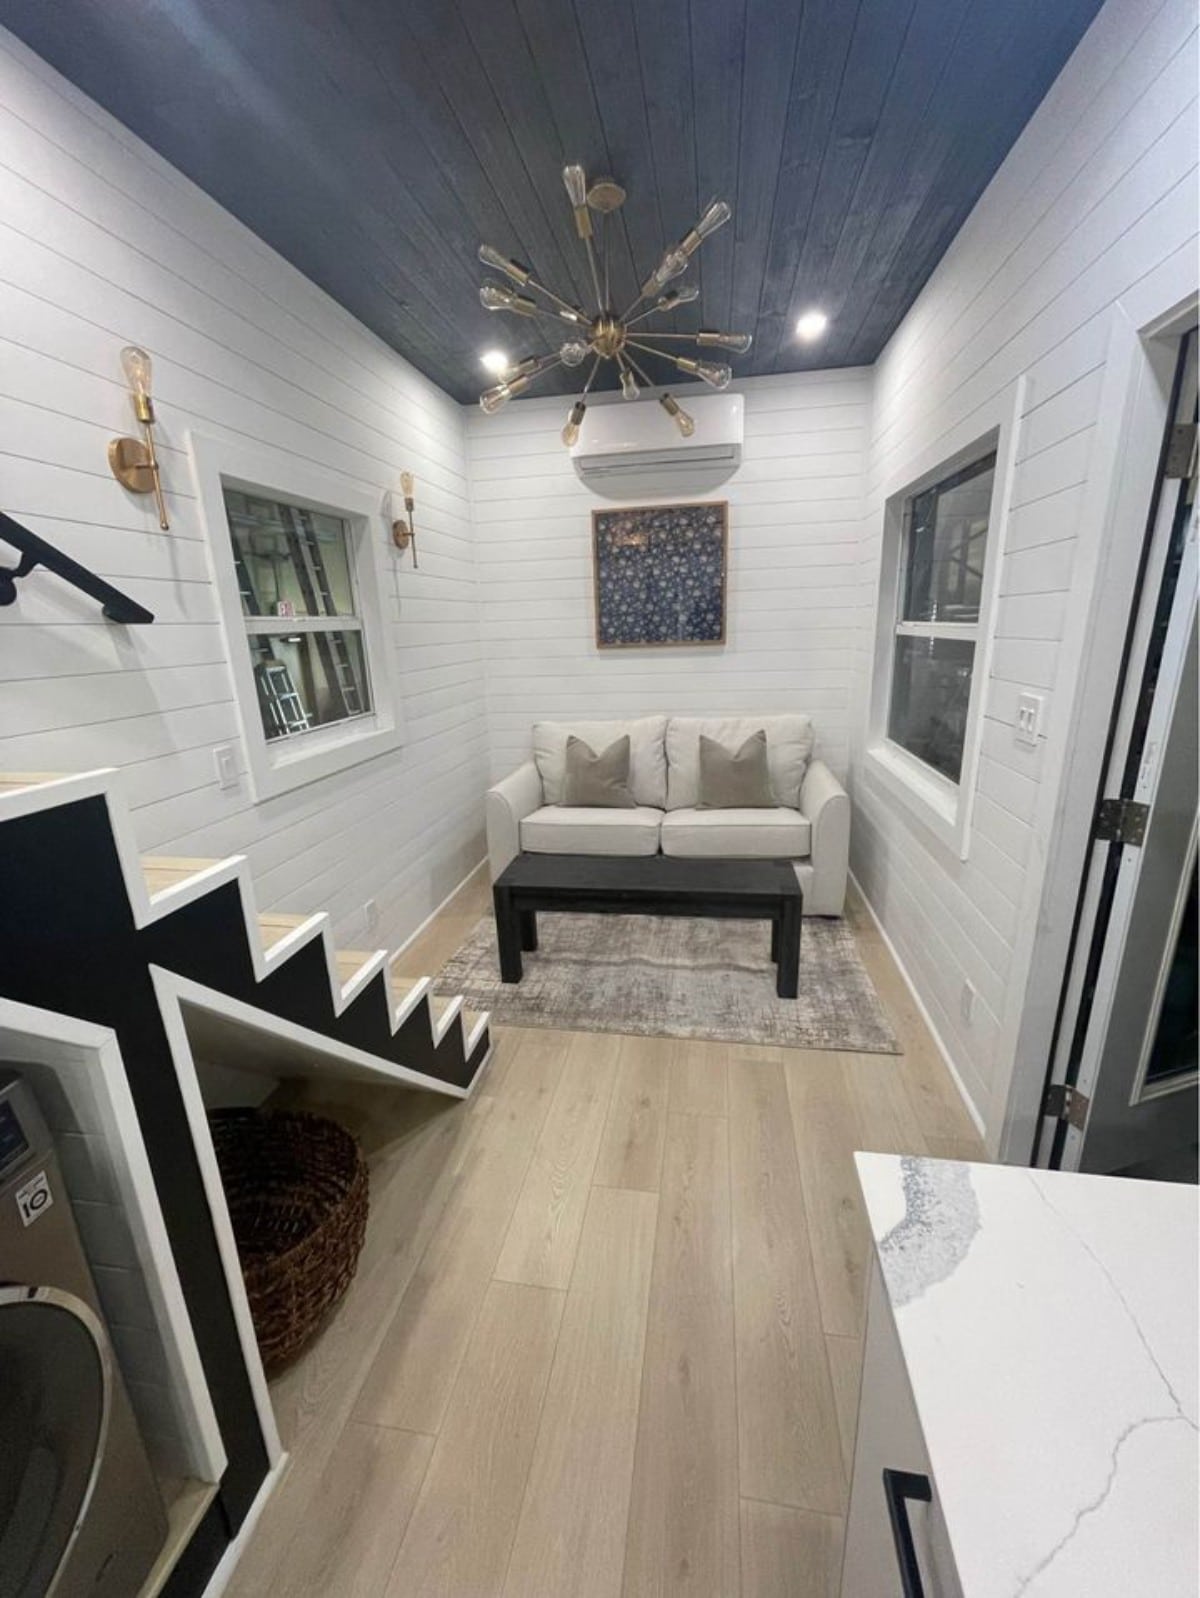 Stunning interior and living area of New 24' Luxury Tiny Home has a couch, coffee table, windows, chandelier and an air condition.